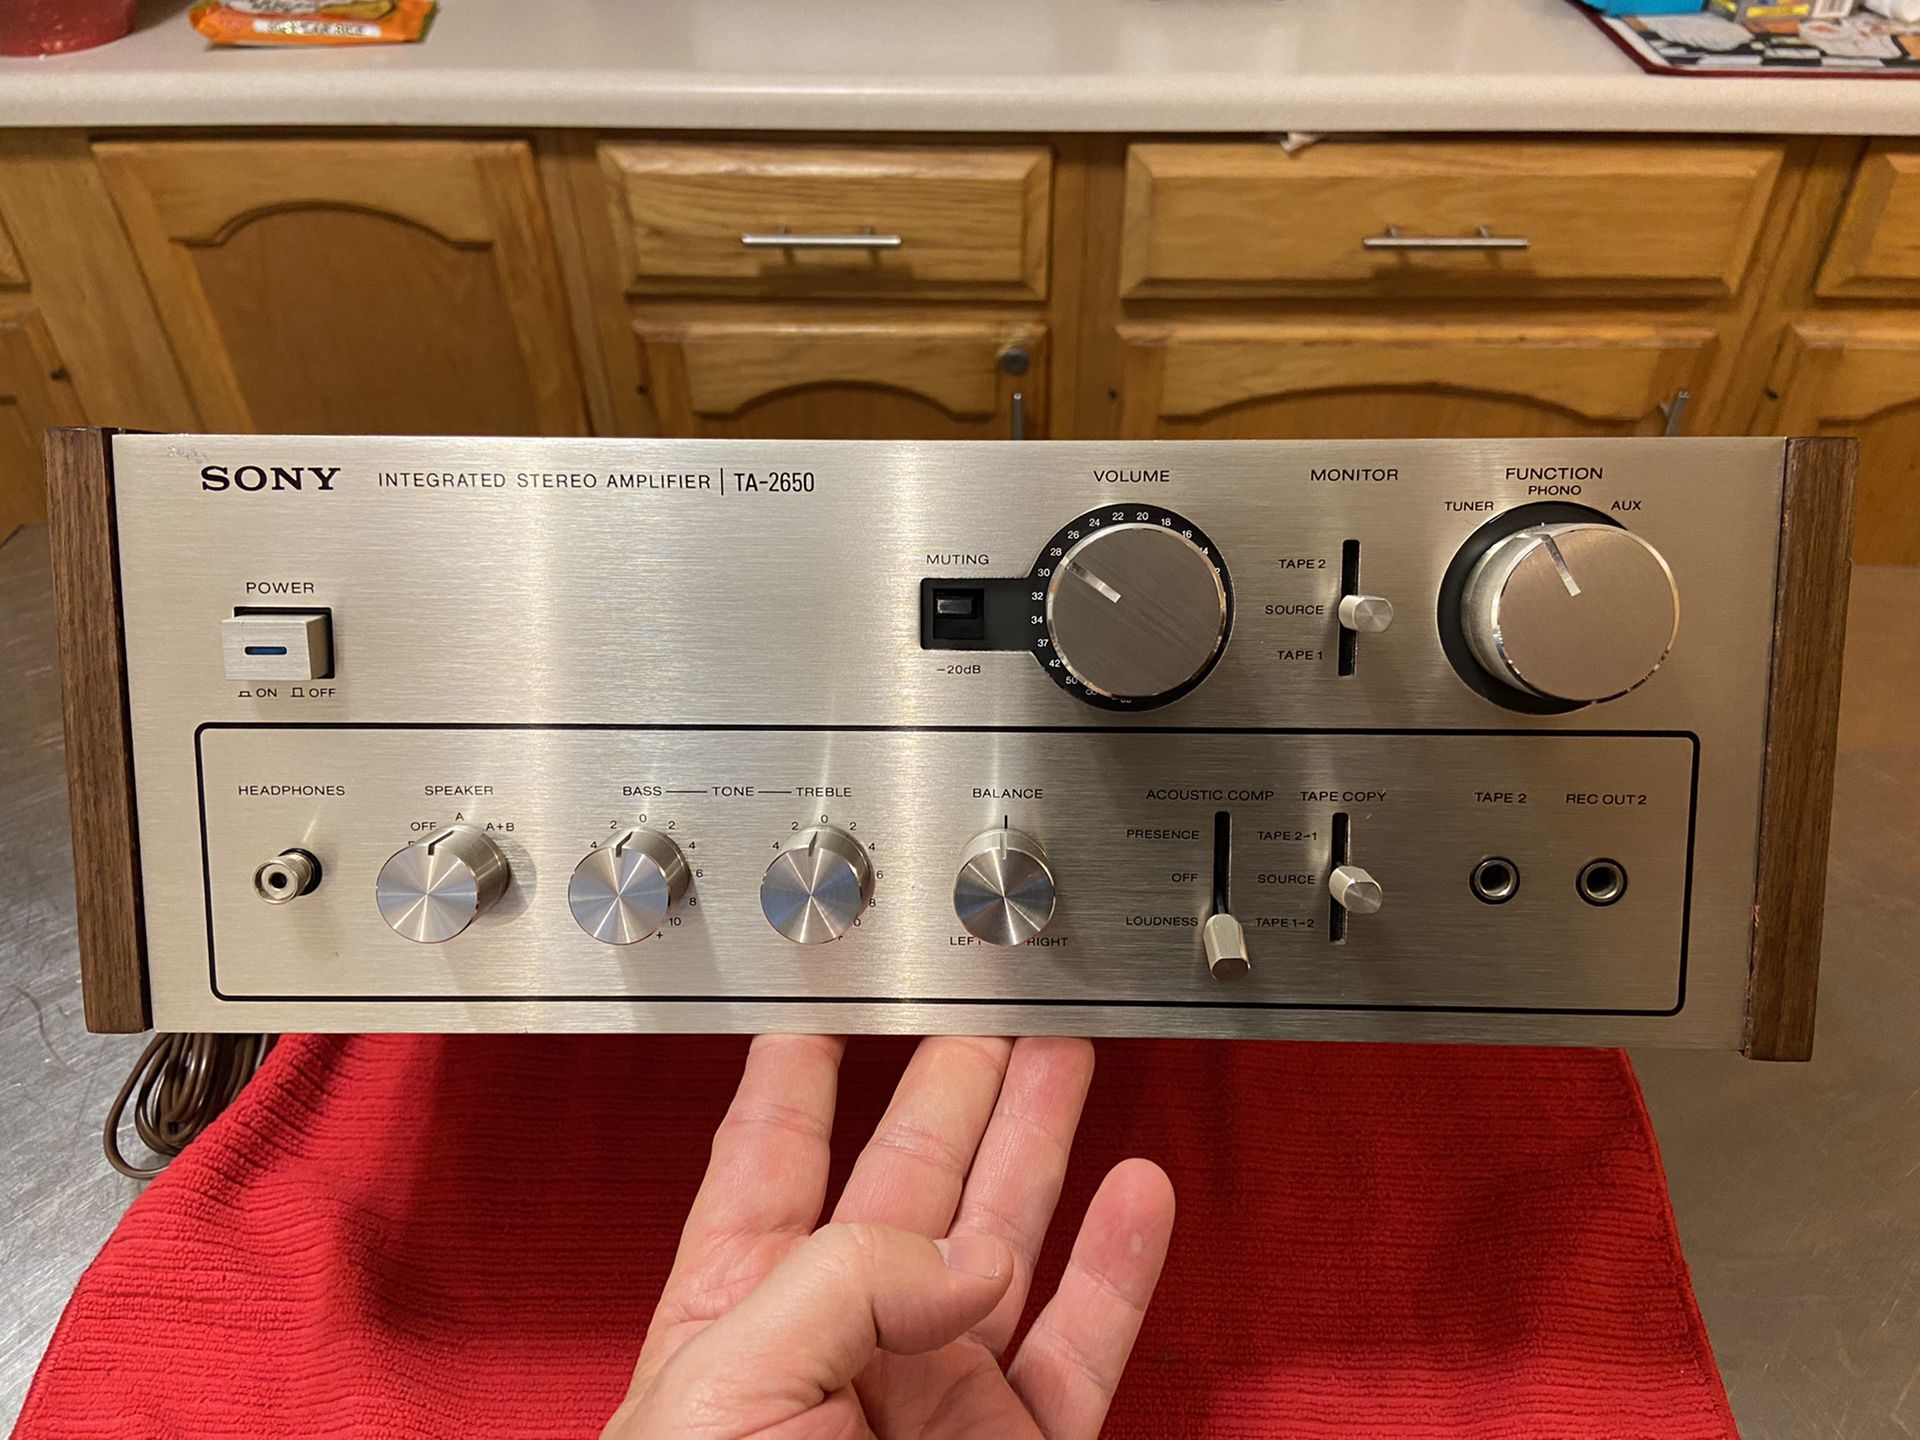 Vintage Sony integrated amplifier